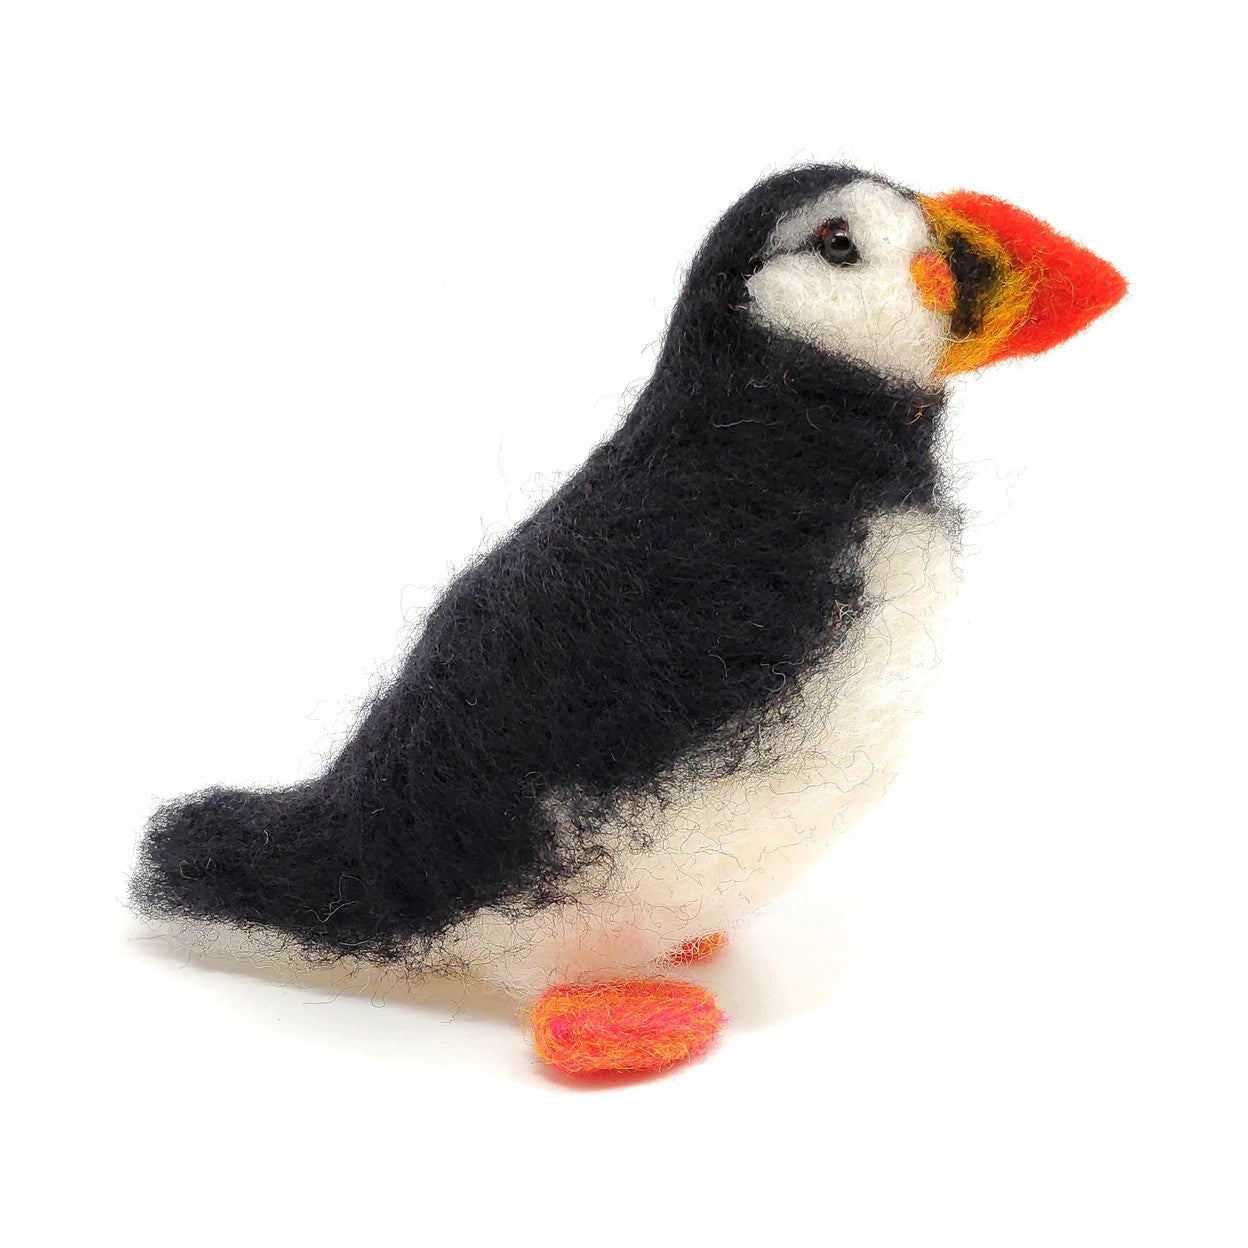 British Birds - Atlantic Puffin Needle Felting Kit from The Crafty Kit Co. Made in Scotland